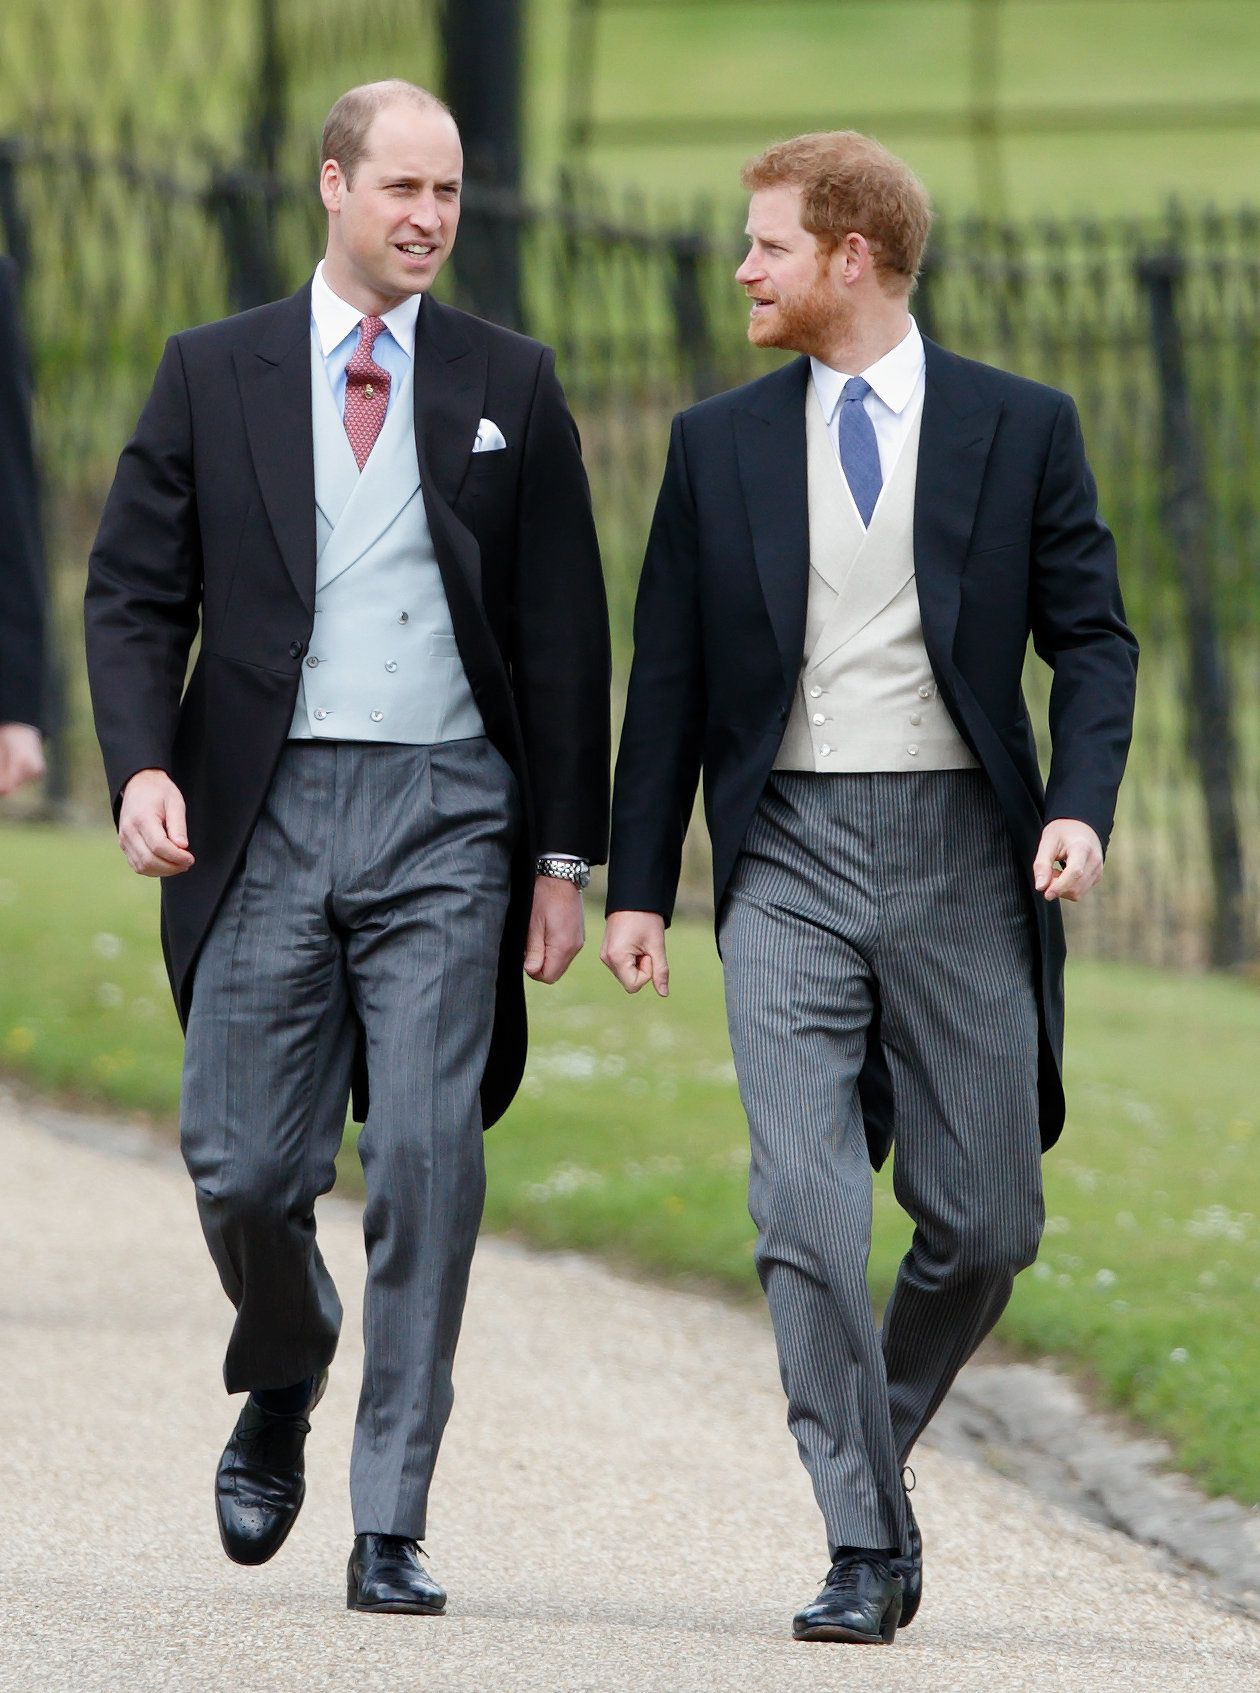 Prince William, Duke of Cambridge and Prince Harry wore morning suits to the wedding of Pippa Middleton and James Matthews at St Mark's Church on 20 May 2017 in Englefield Green, England.